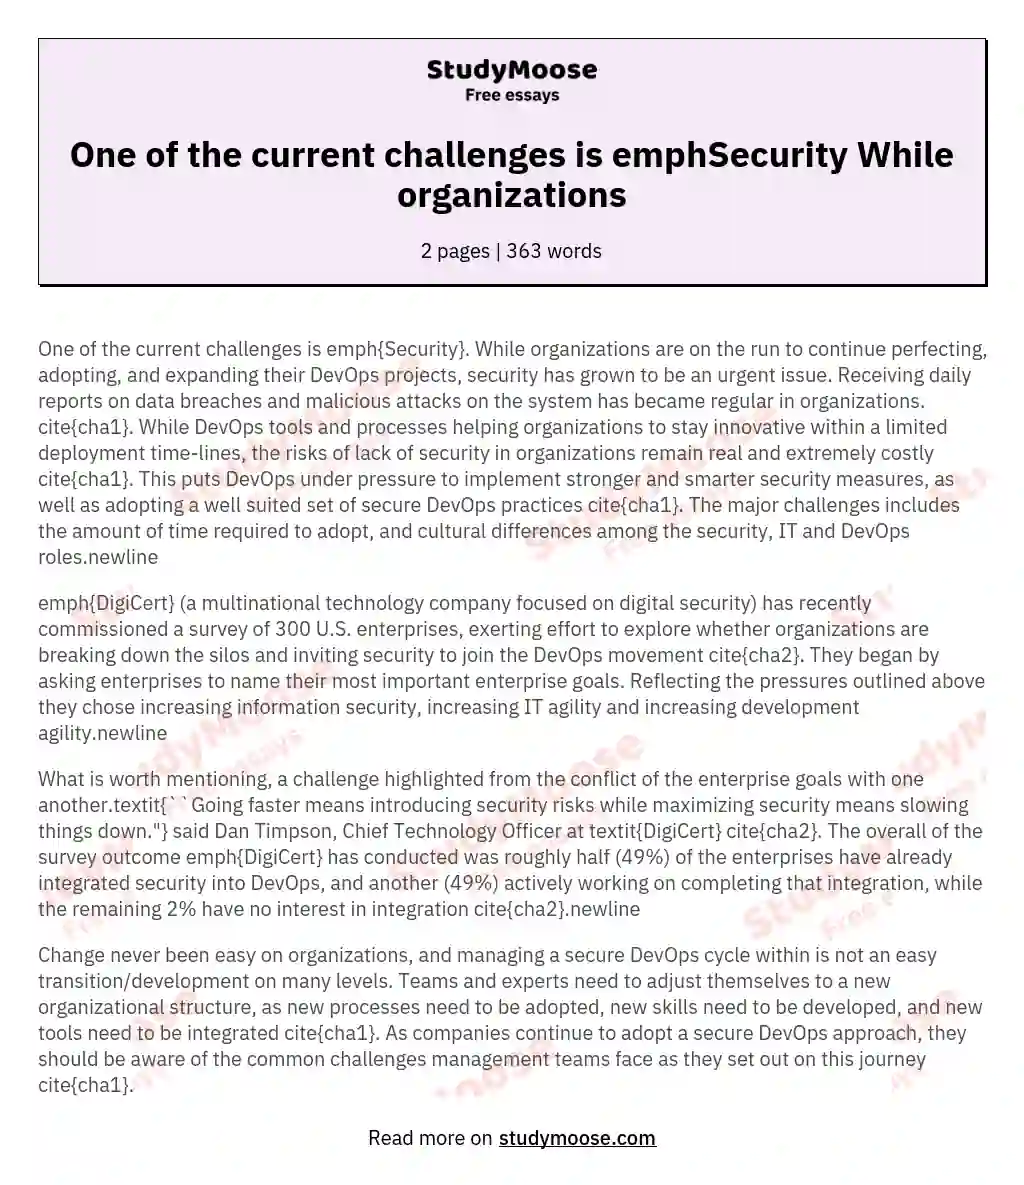 One of the current challenges is emphSecurity While organizations essay